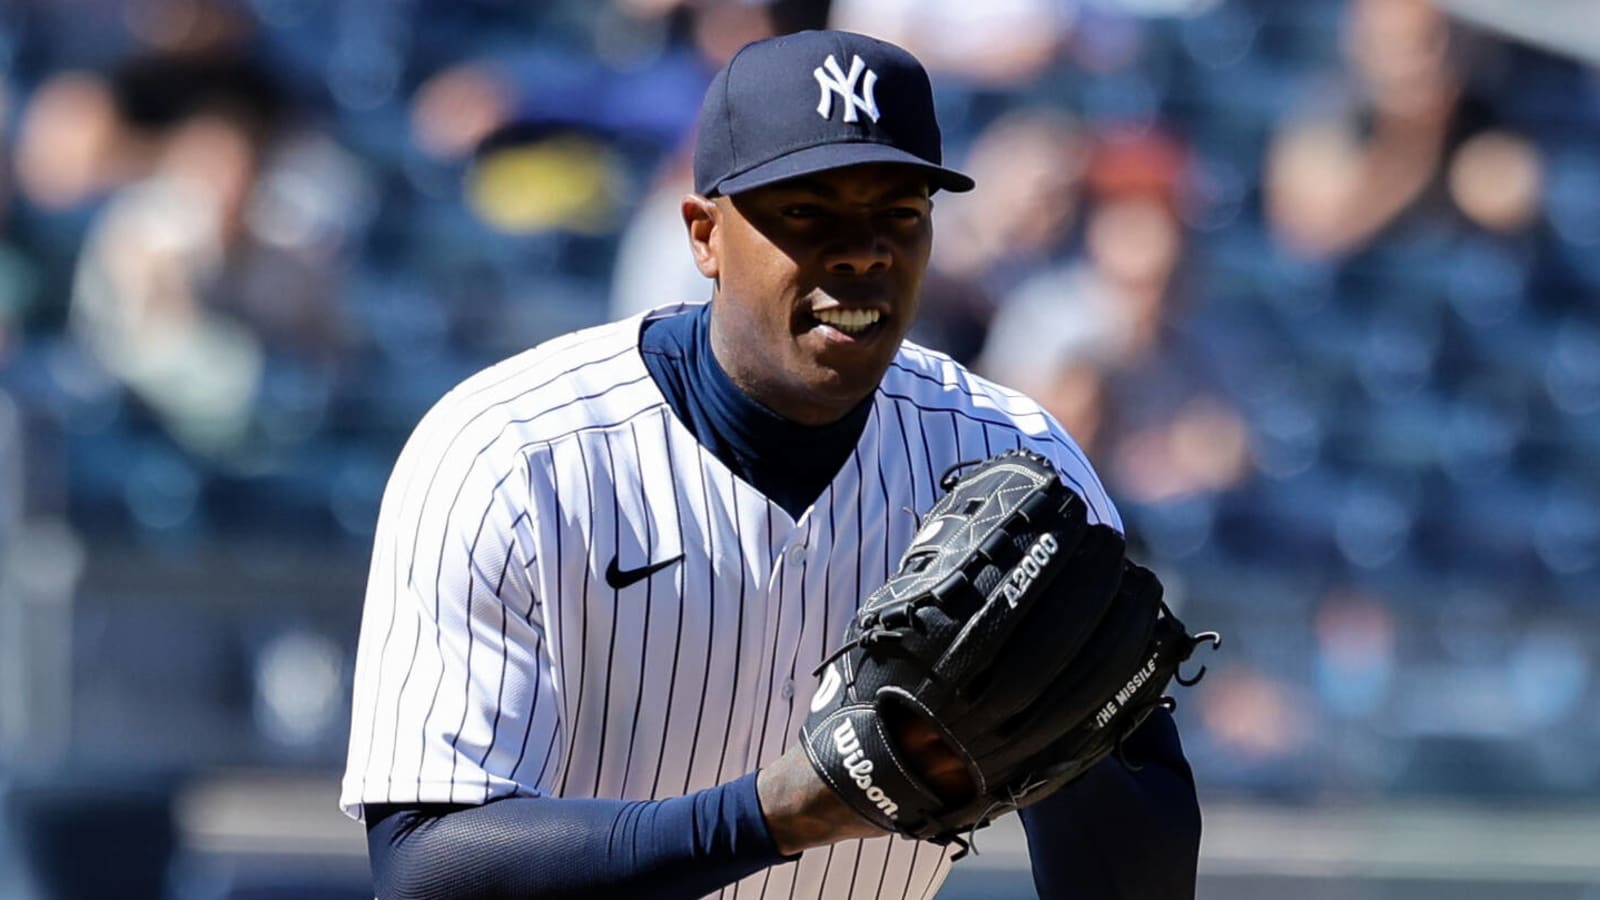 Aroldis Chapman turned down better offer to sign with Royals